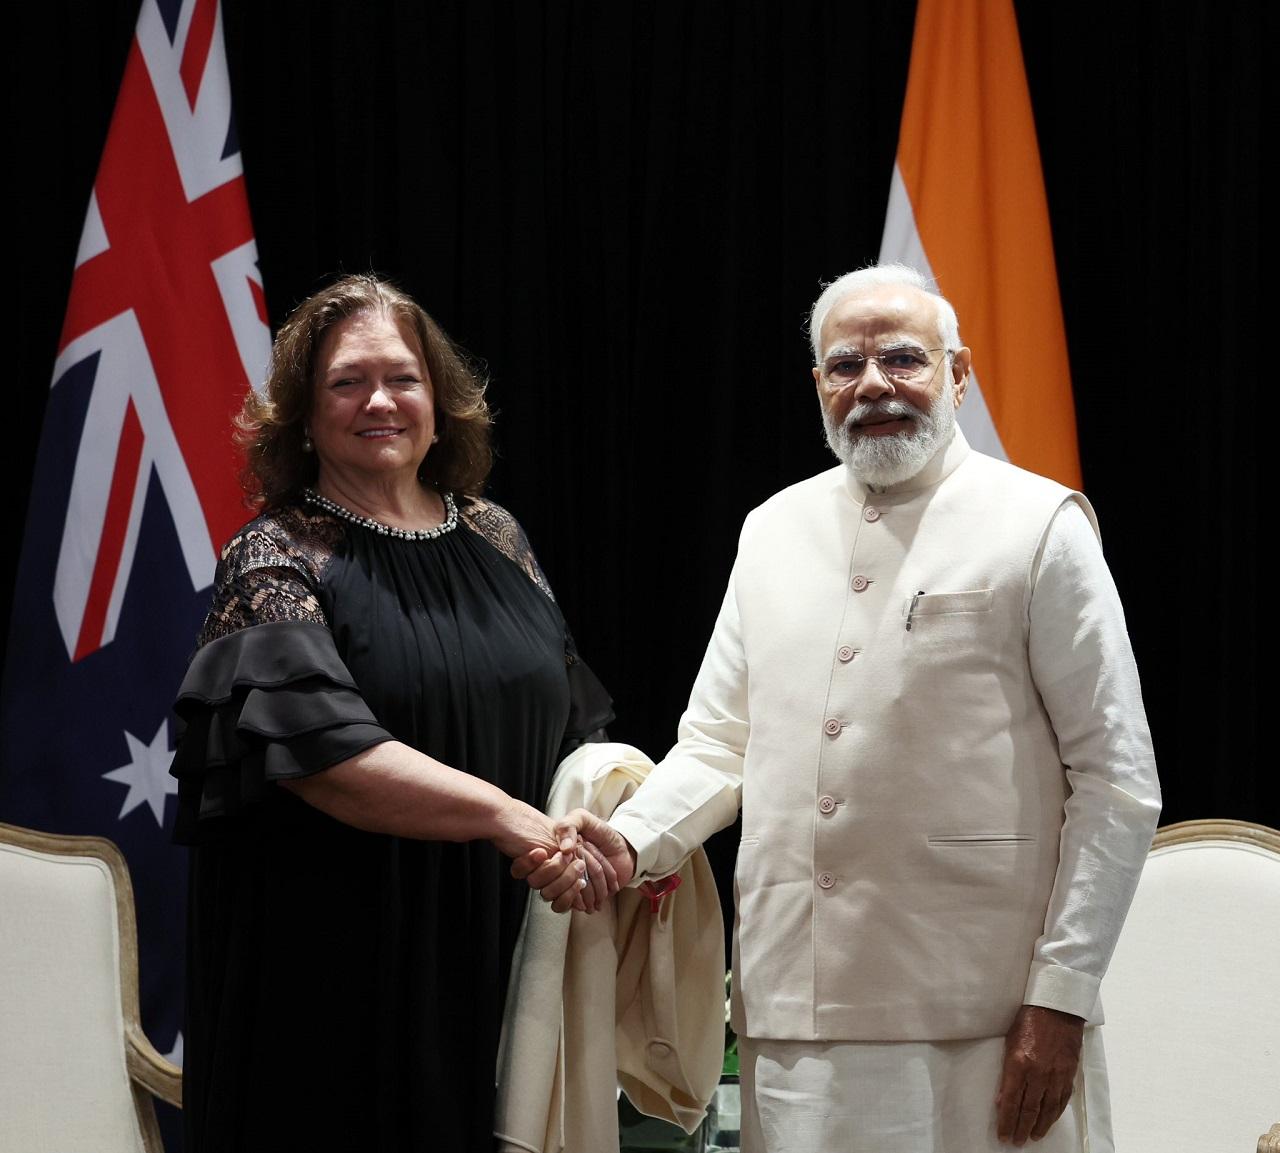 PM Modi held bilateral meetings with Hancock Prospecting Executive Chairman Gina Rinehart, Fortescue Future Industry Executive Chairman Andrew Forrest, and AustraliaSuper CEO Paul Schroder